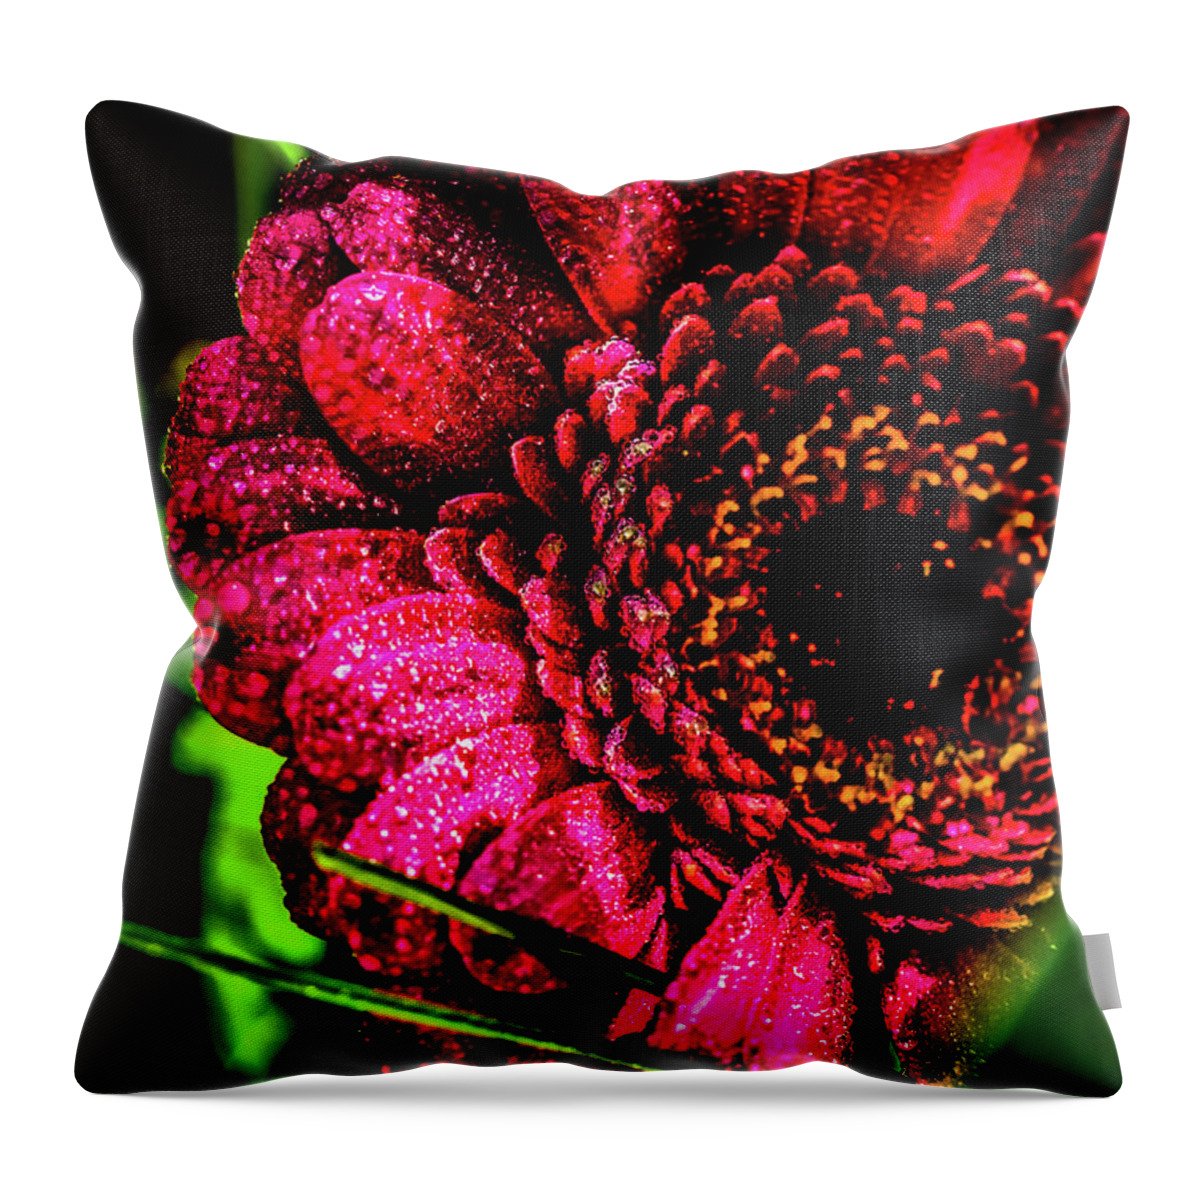 Gerbera Flower Throw Pillow featuring the photograph Raspberry Gerberay by Margaux Dreamaginations